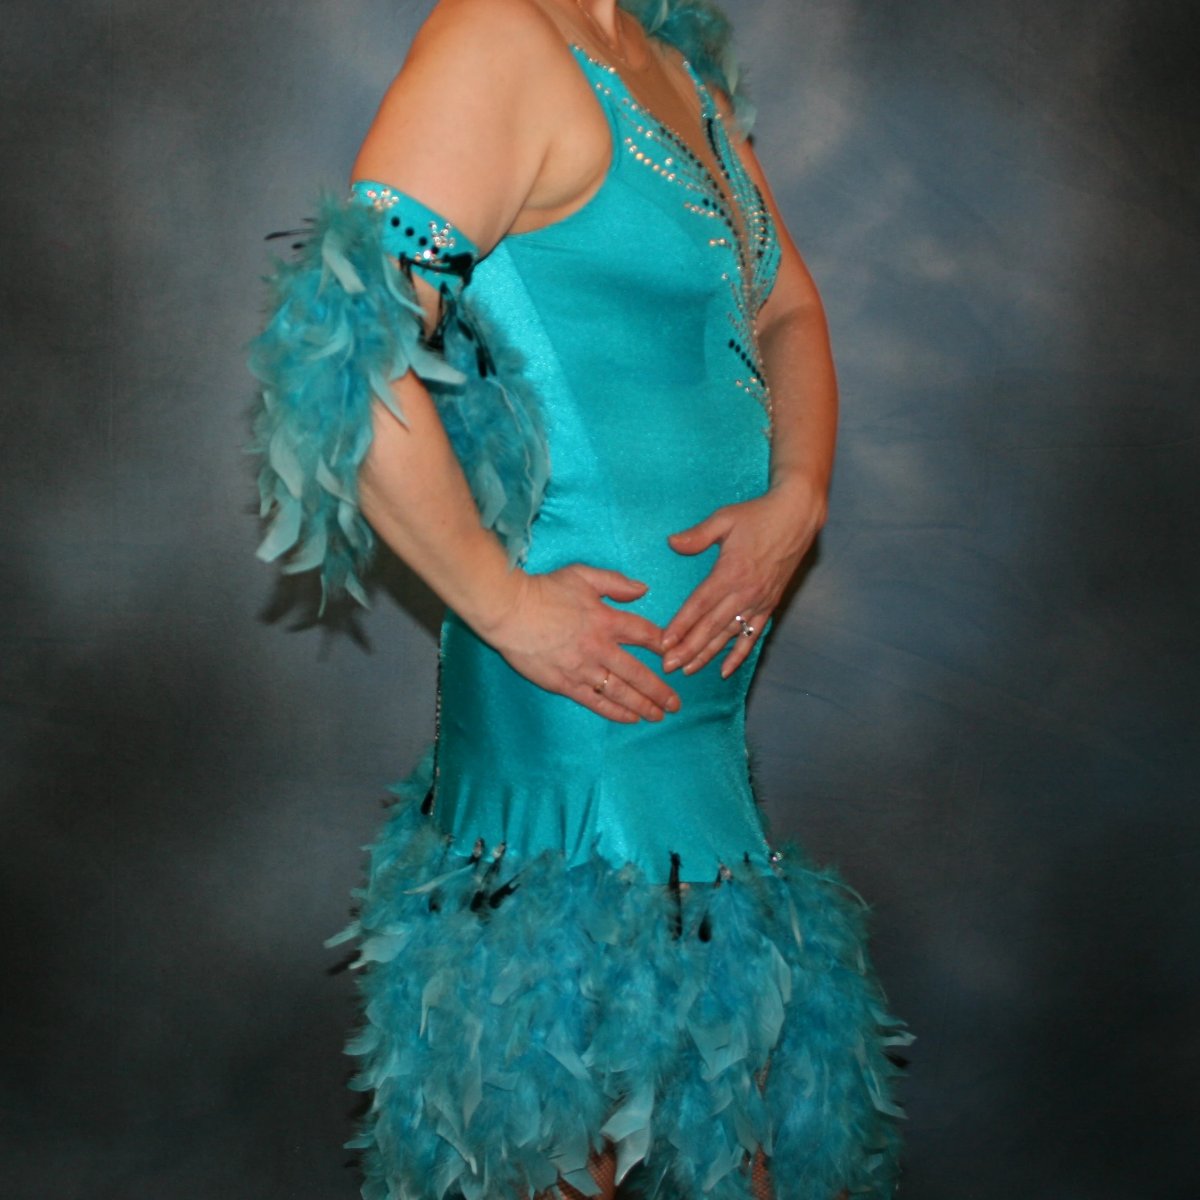 close side view of Turquoise Latin/rhythm dance dress created in turquoise lycra on nude illusion, is embellished with crystal and jet black Swarovski rhinestones, with chandelle feathers and black spangles. The v styled skirt slits up high on both sides. Matching arm bands complete the look.